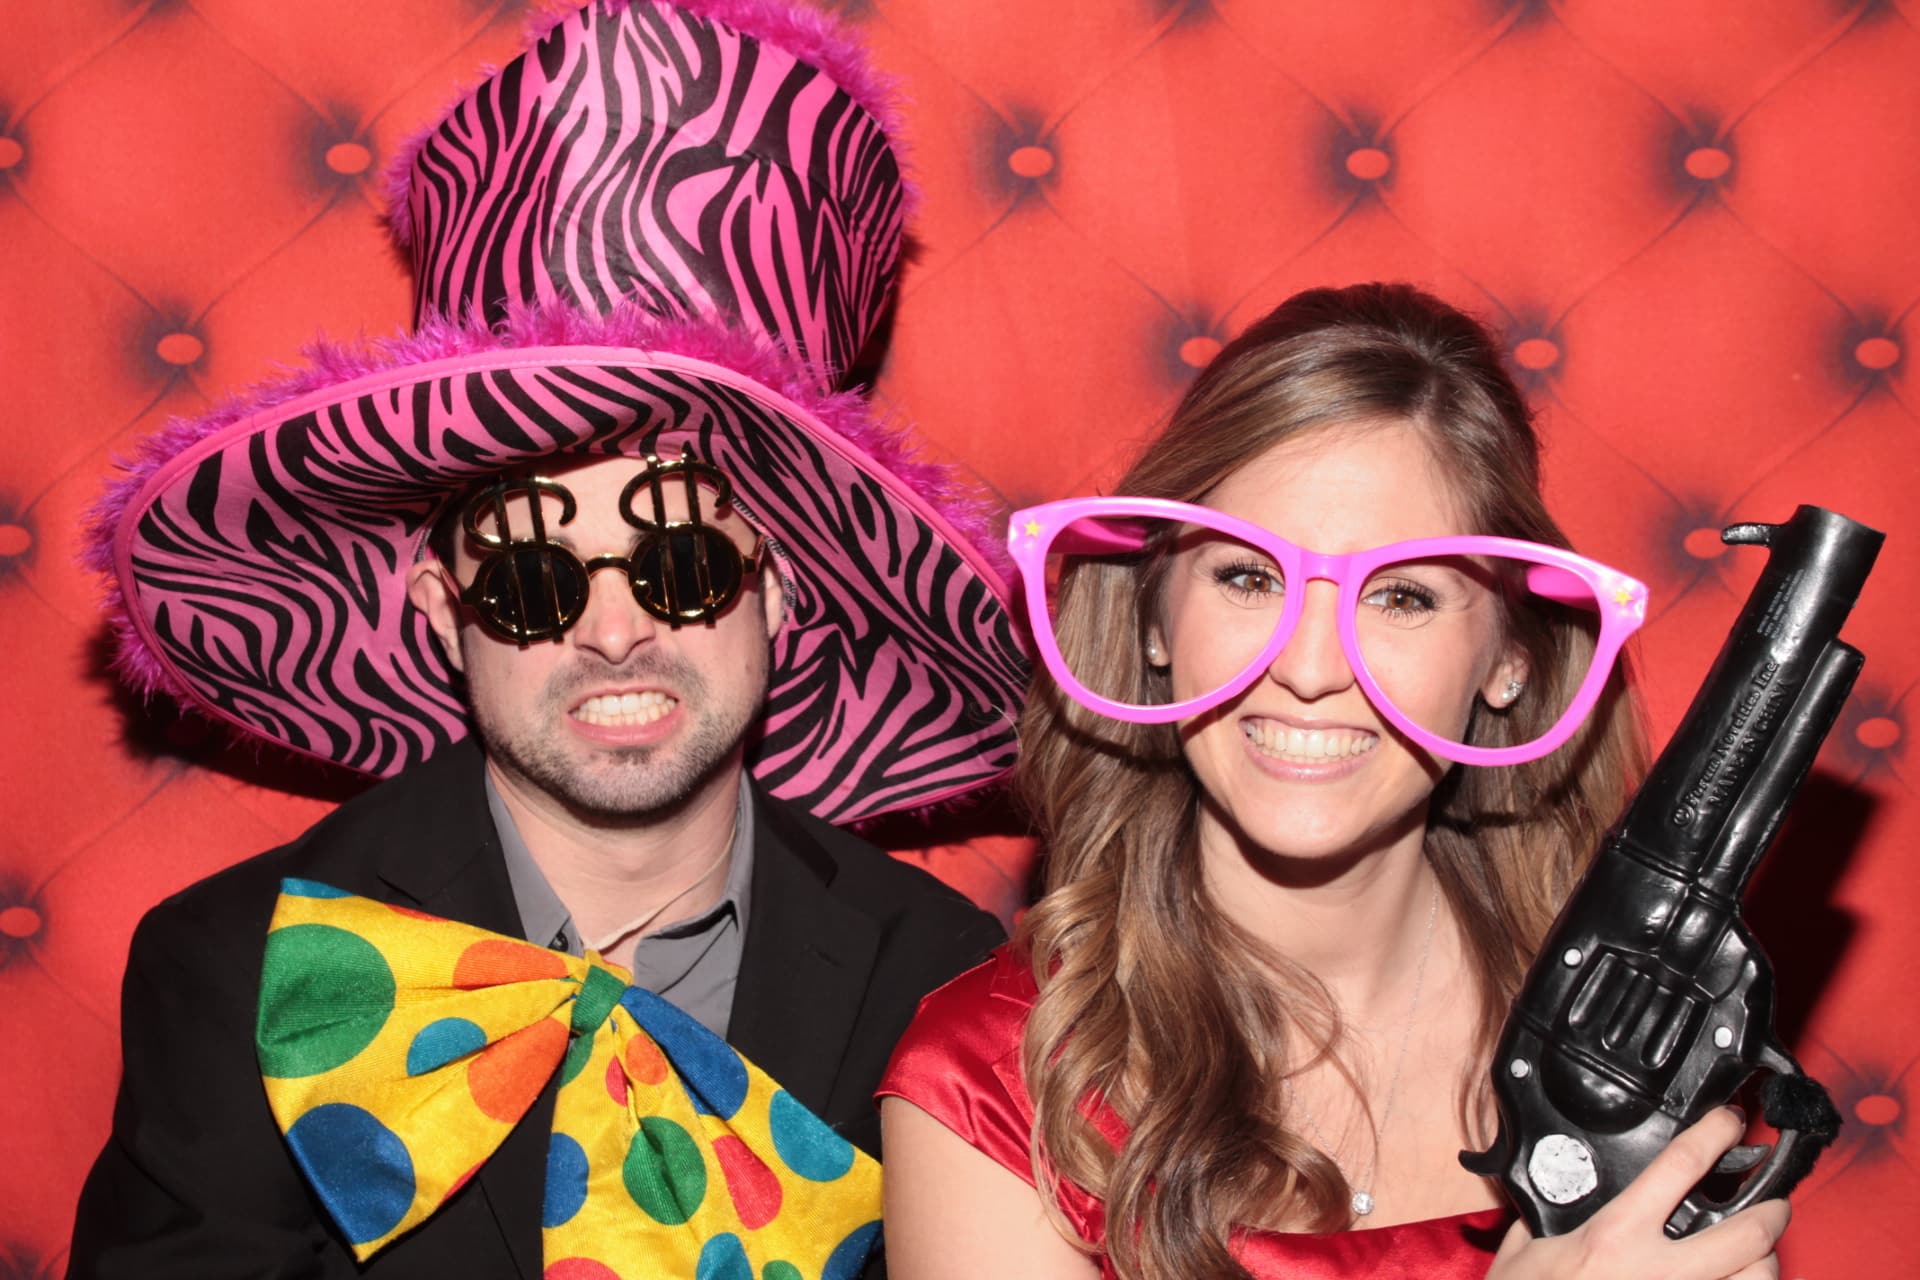 Photo Booth-Rental-No.1-Austin-Horseshoe Bay-Quali Point-Wedding-Memories-Awesome-Props